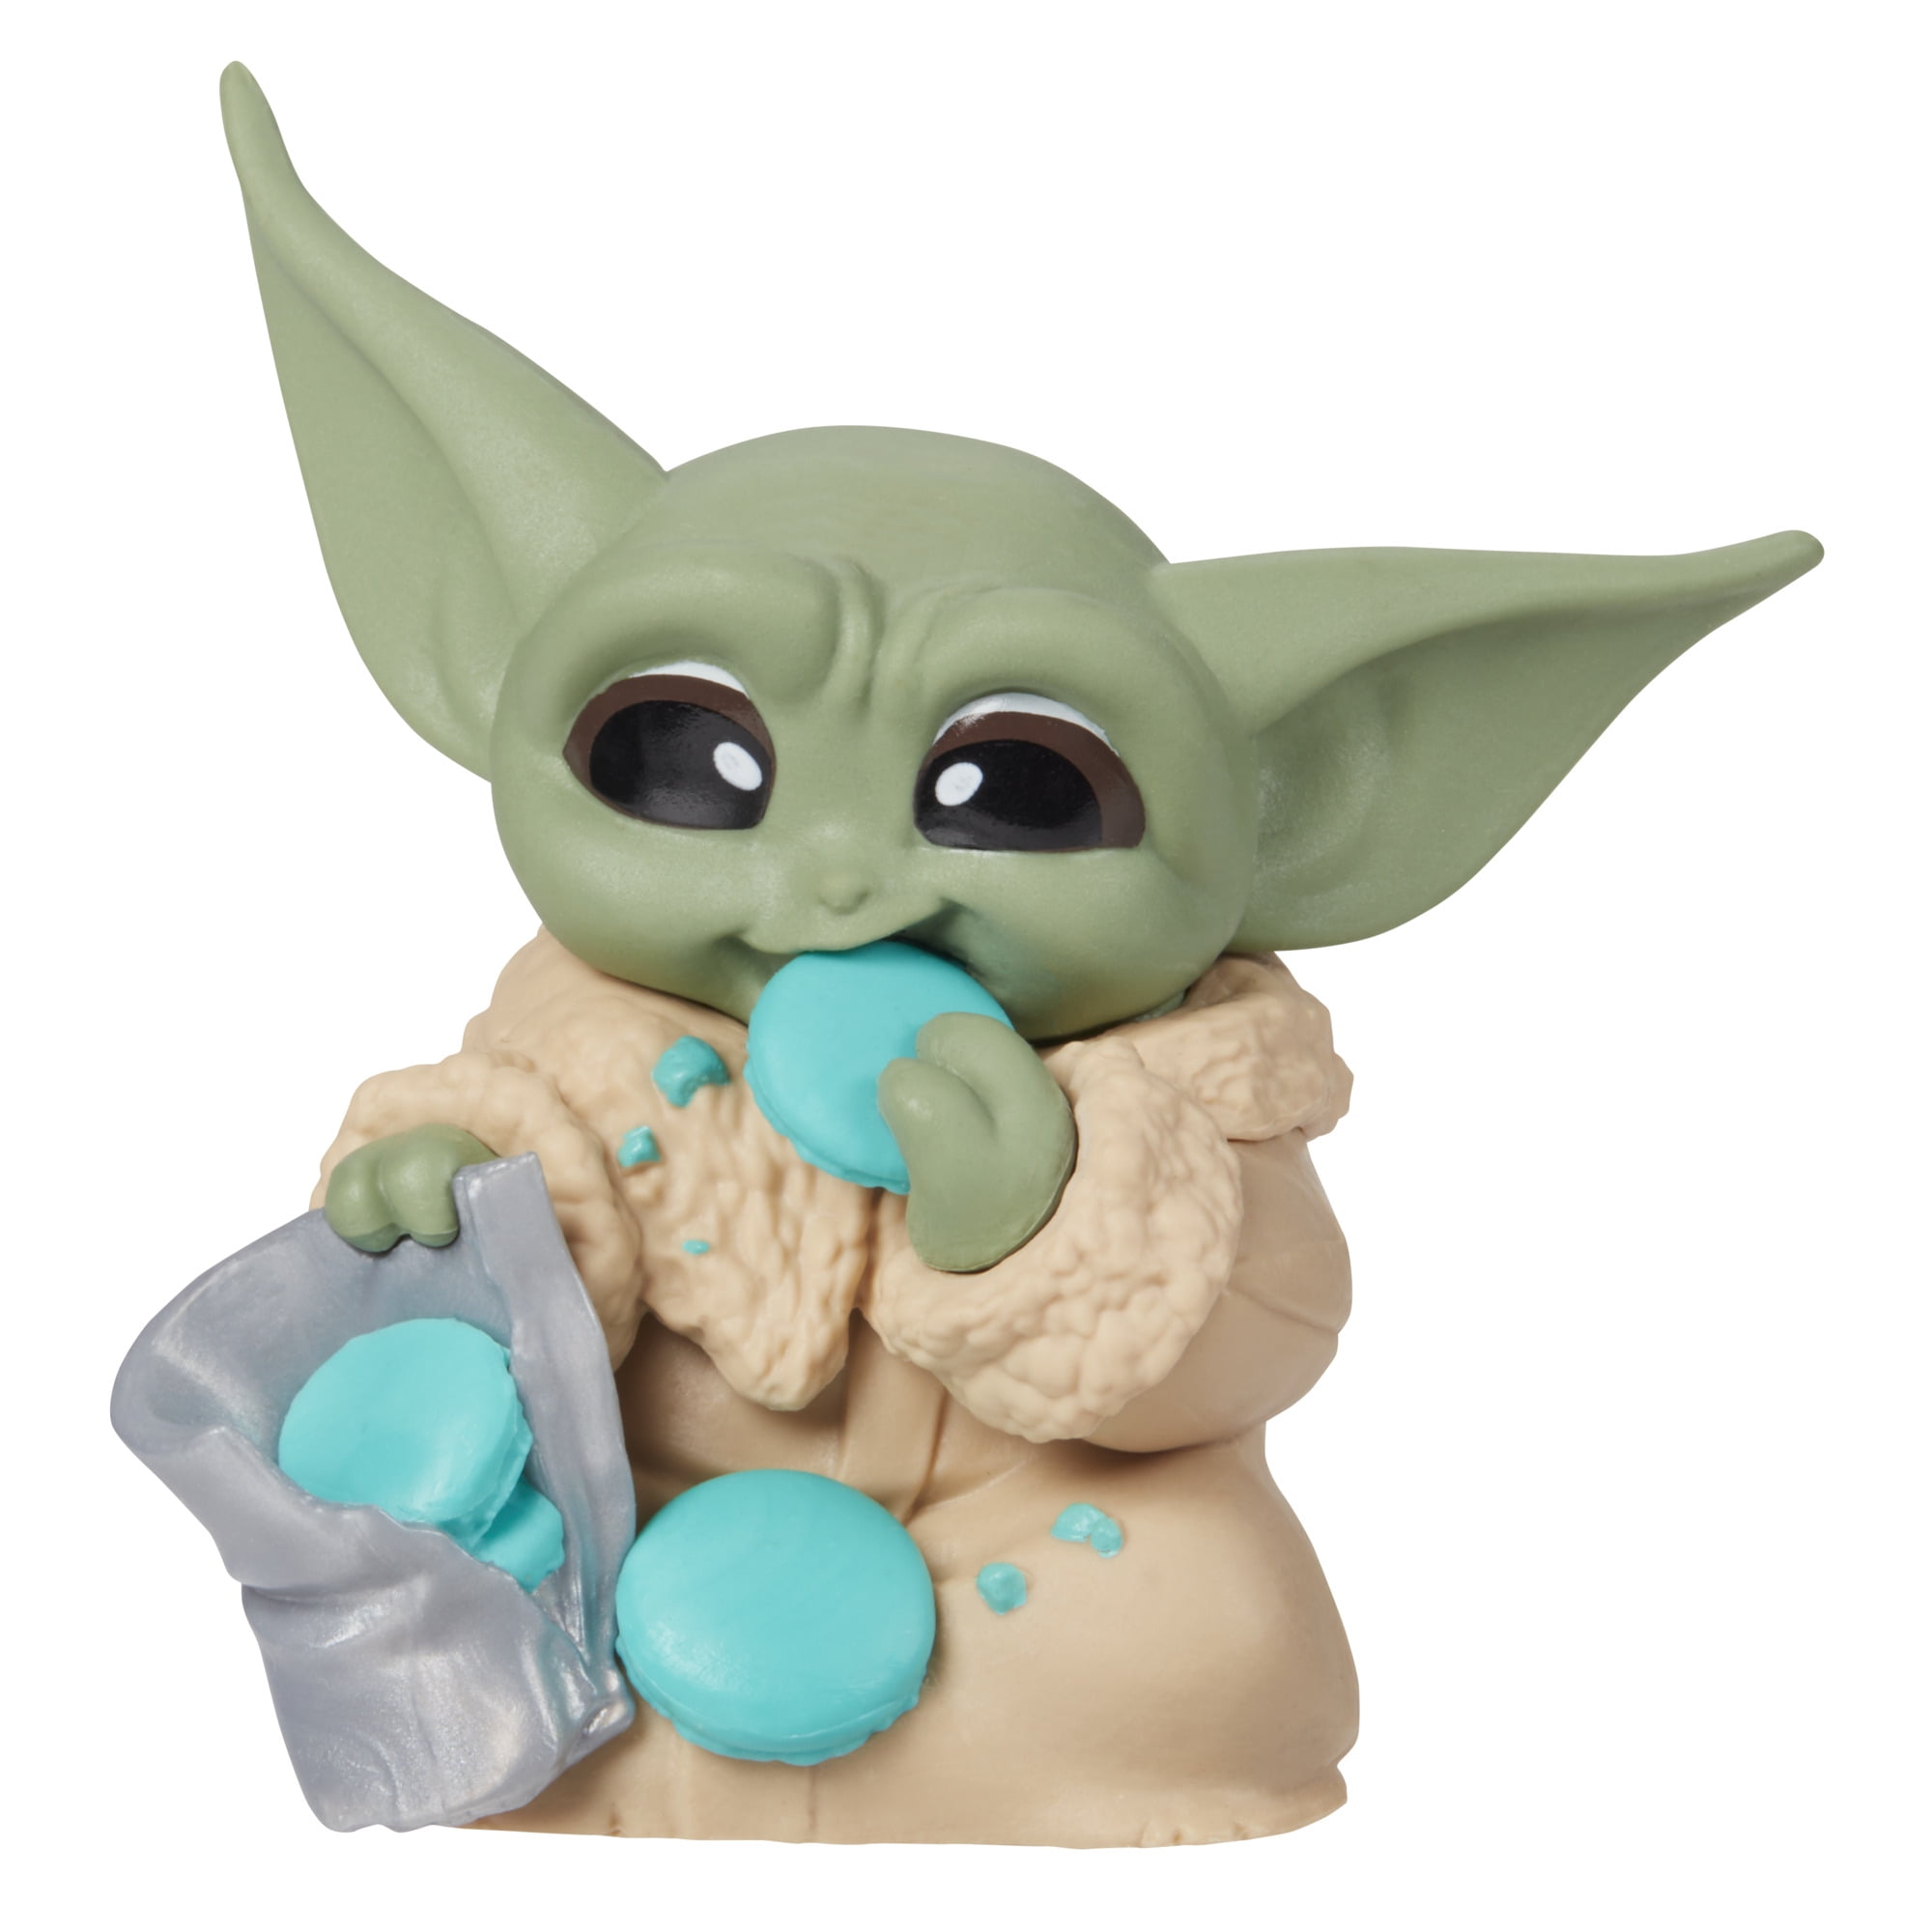 The Child And Pram RC 27 MHz With Remote Grogu Star Wars Mandalorian Baby Yoda 